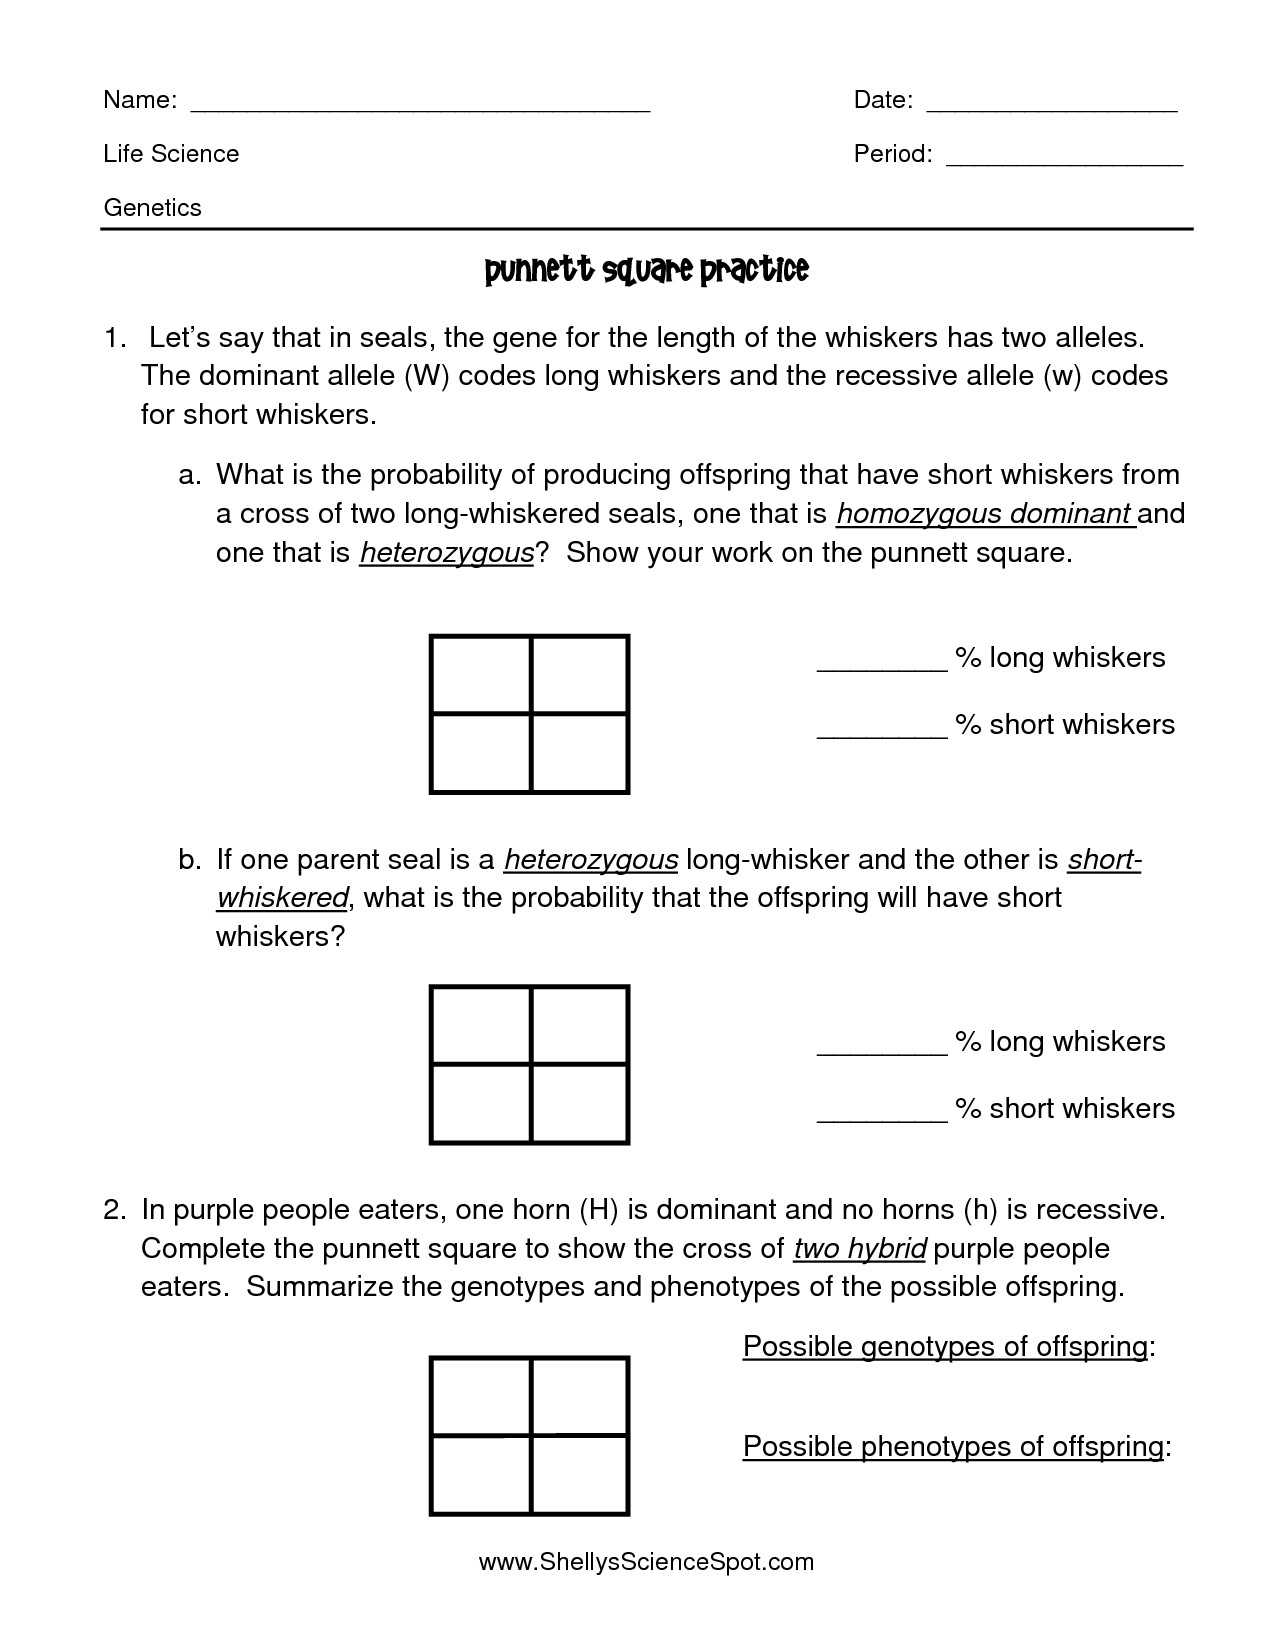 Genetics Practice Problems Worksheet Key together with Genetics Worksheet Answer Key Awesome Blood Type and Inheritance